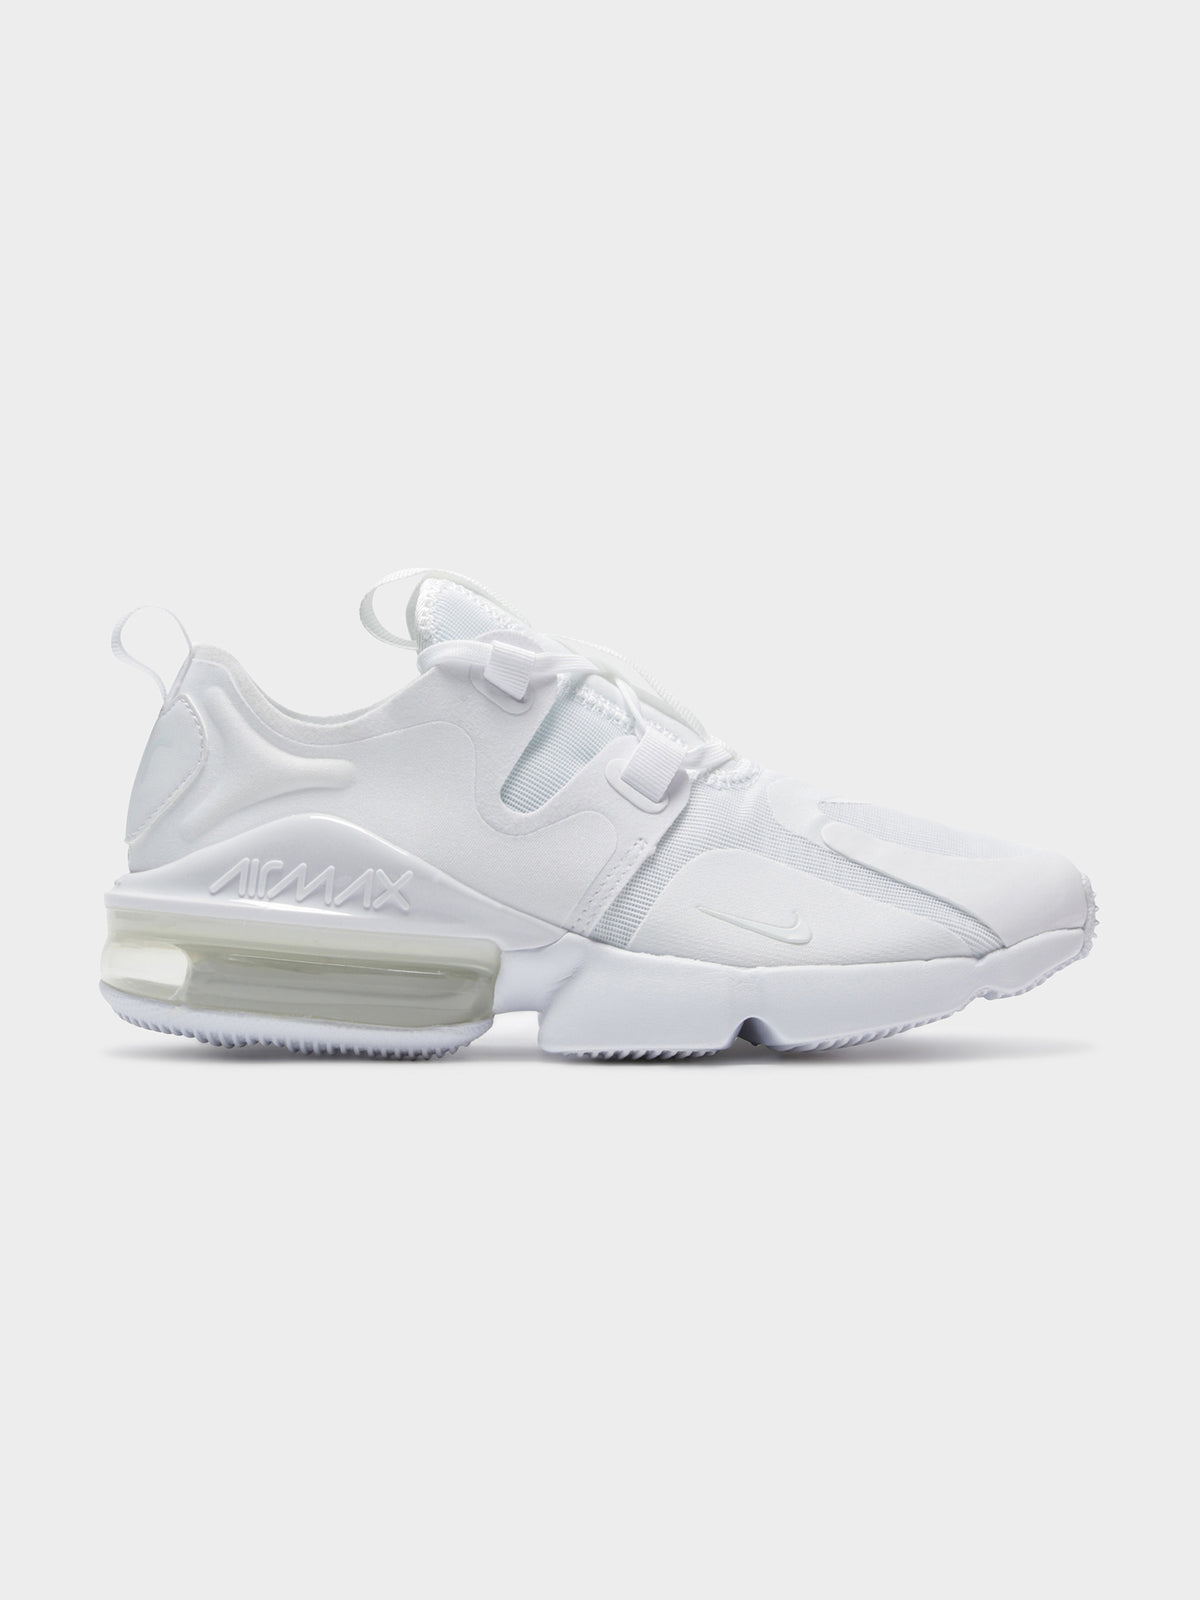 Womens Air Max Infinity Sneakers in White